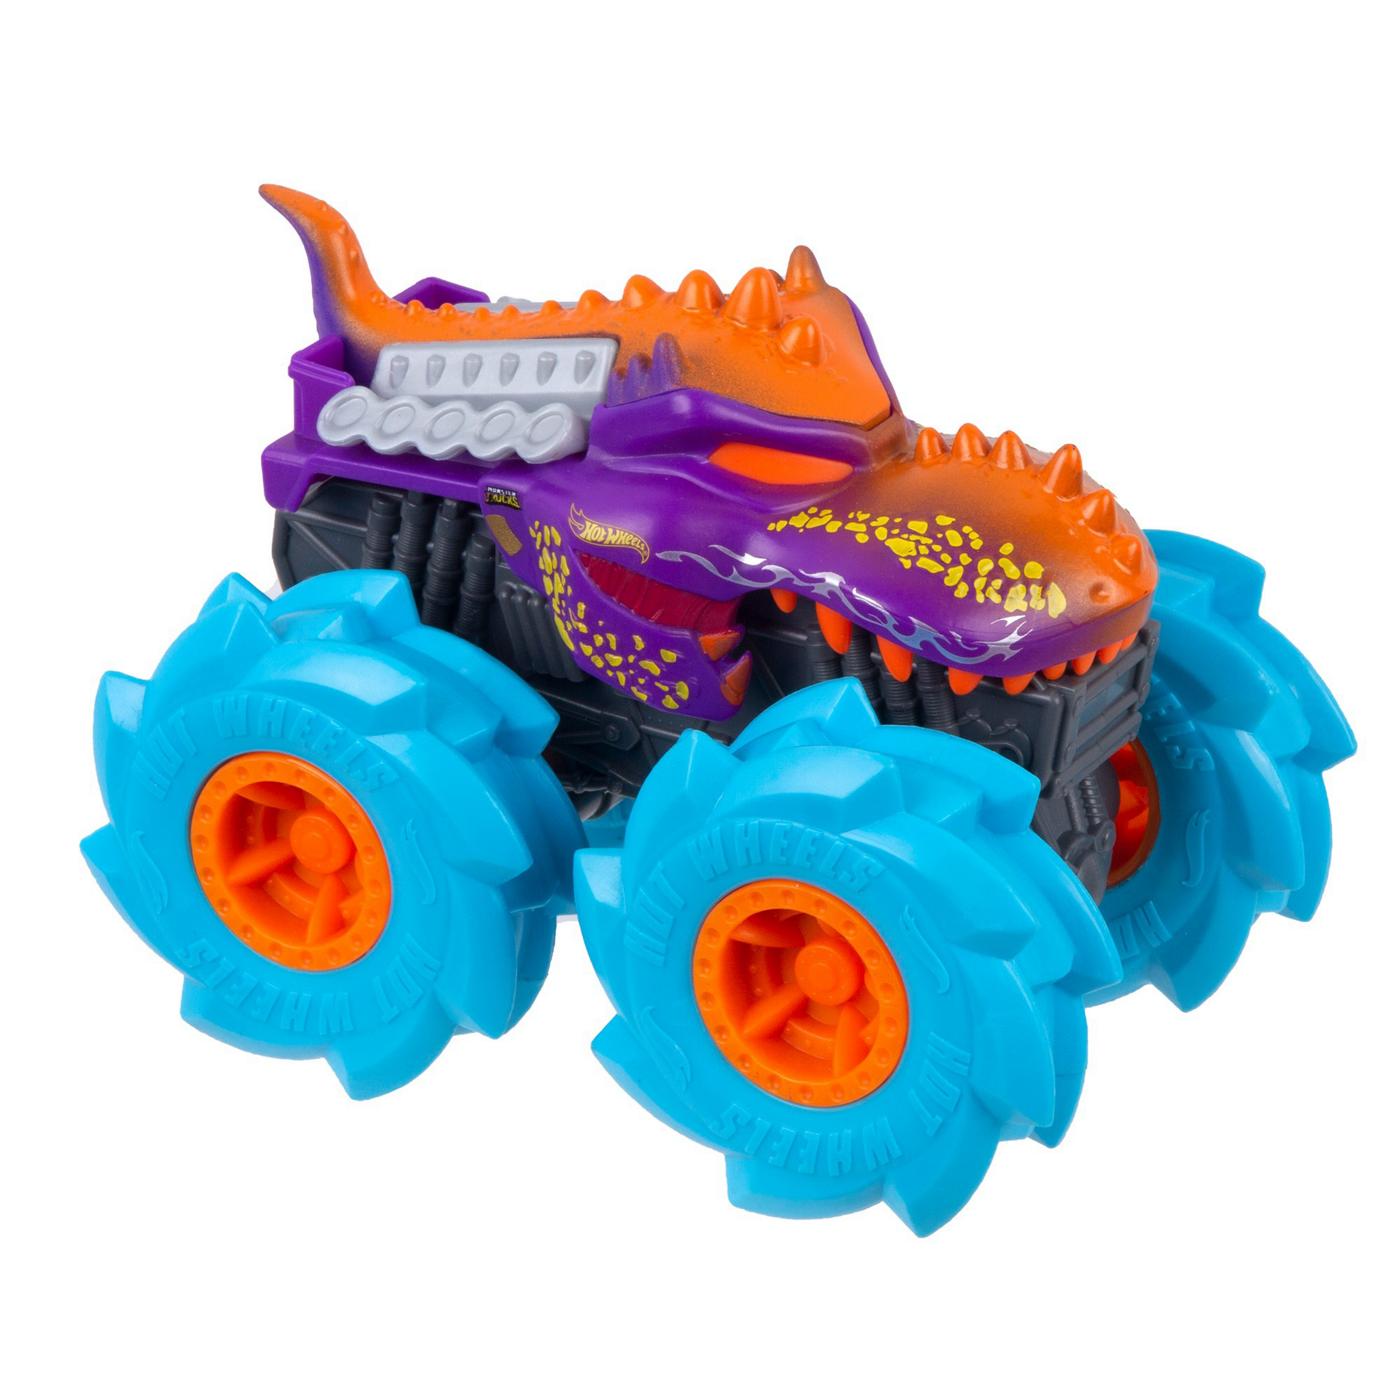 Hot Wheels Monster Truck 1:43 Scale Bash Ups, Assorted; image 4 of 4